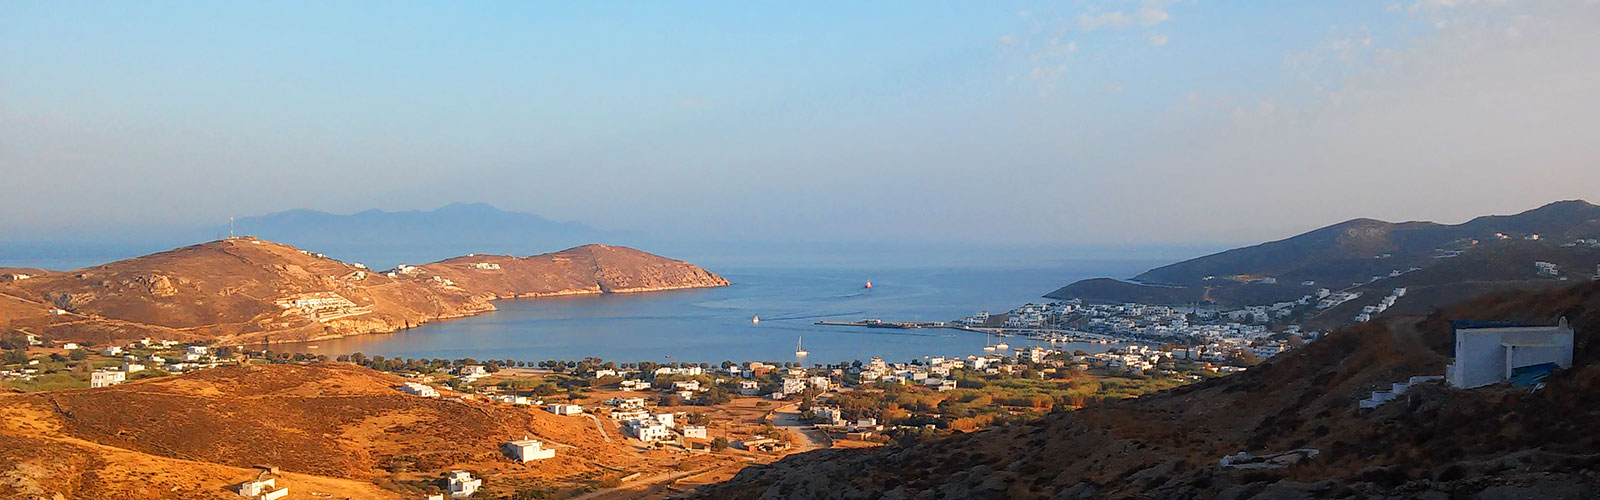 The village of Livadi and the port of Serifos